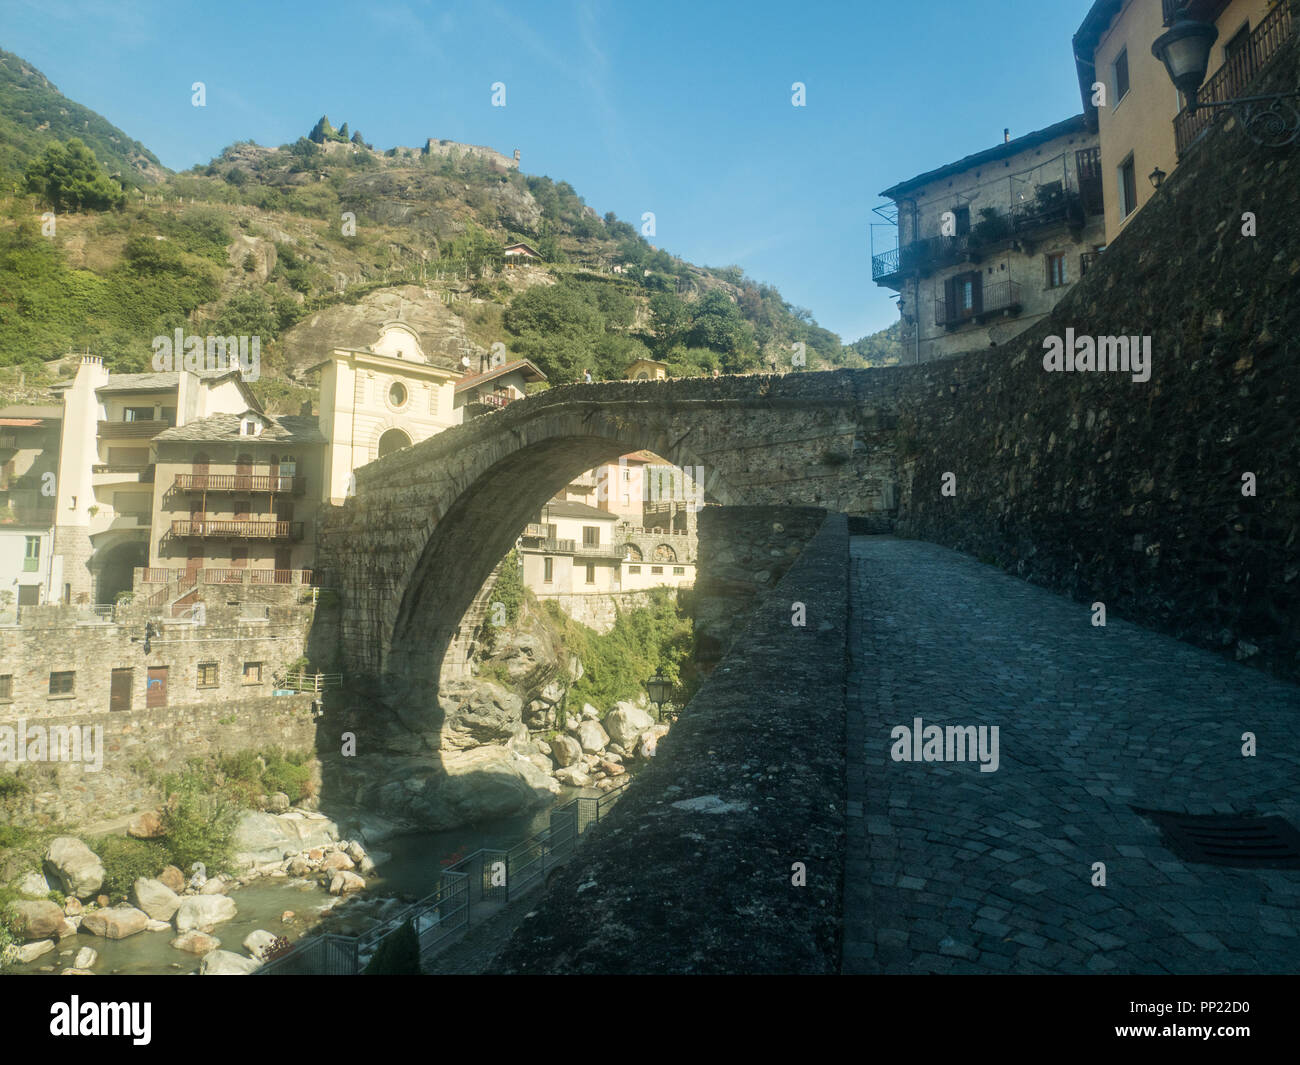 Roman bridge dated to the 1st century BC over the river Lys in the town of Pont Saint Martin, Aosta Valley NW Italy. Stock Photo